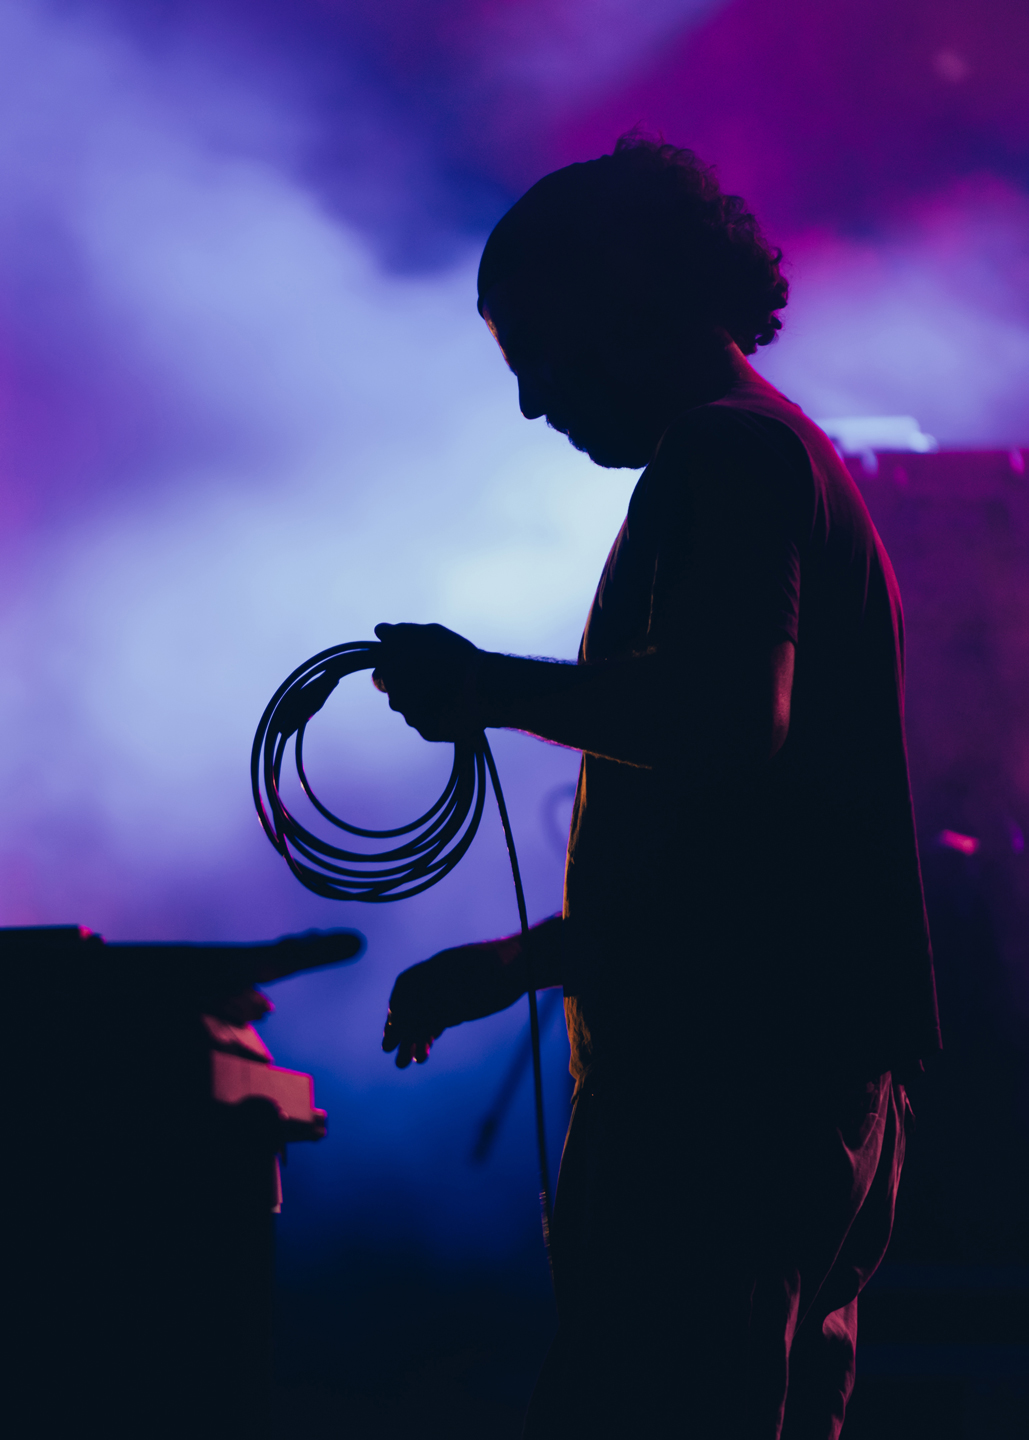 A V2 Video Engineer Assist technician's silhouette against a hazy purple background.